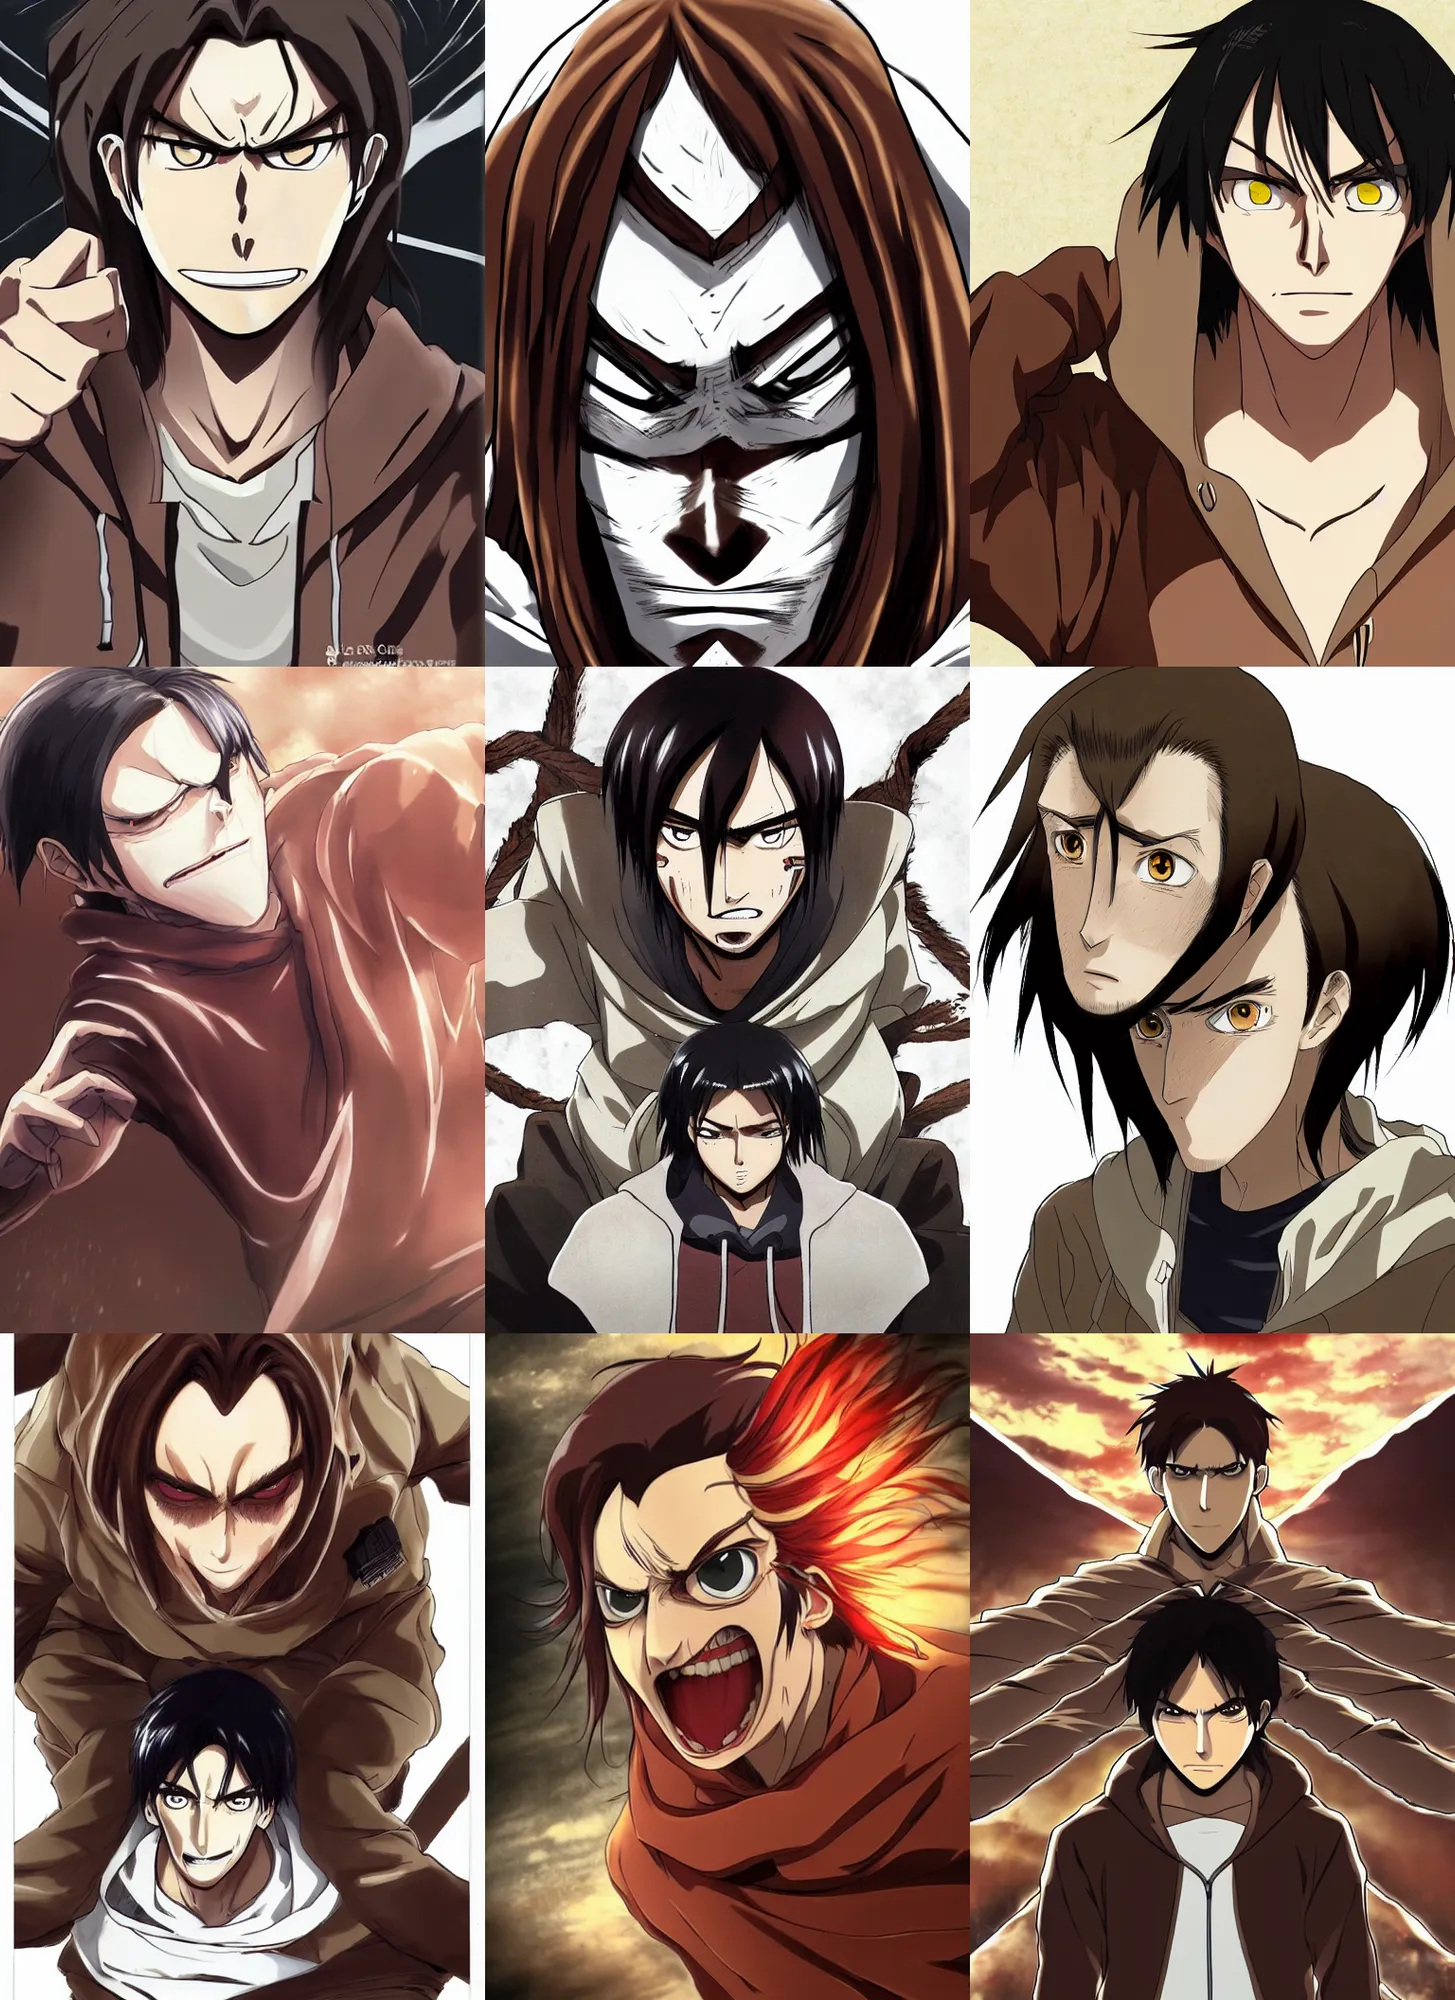 Prompt: a man in his late twenties with long light brown hair tied back, a widows peak and a round face with high cheekbones, wearing a hoody, attack on titan, anime art